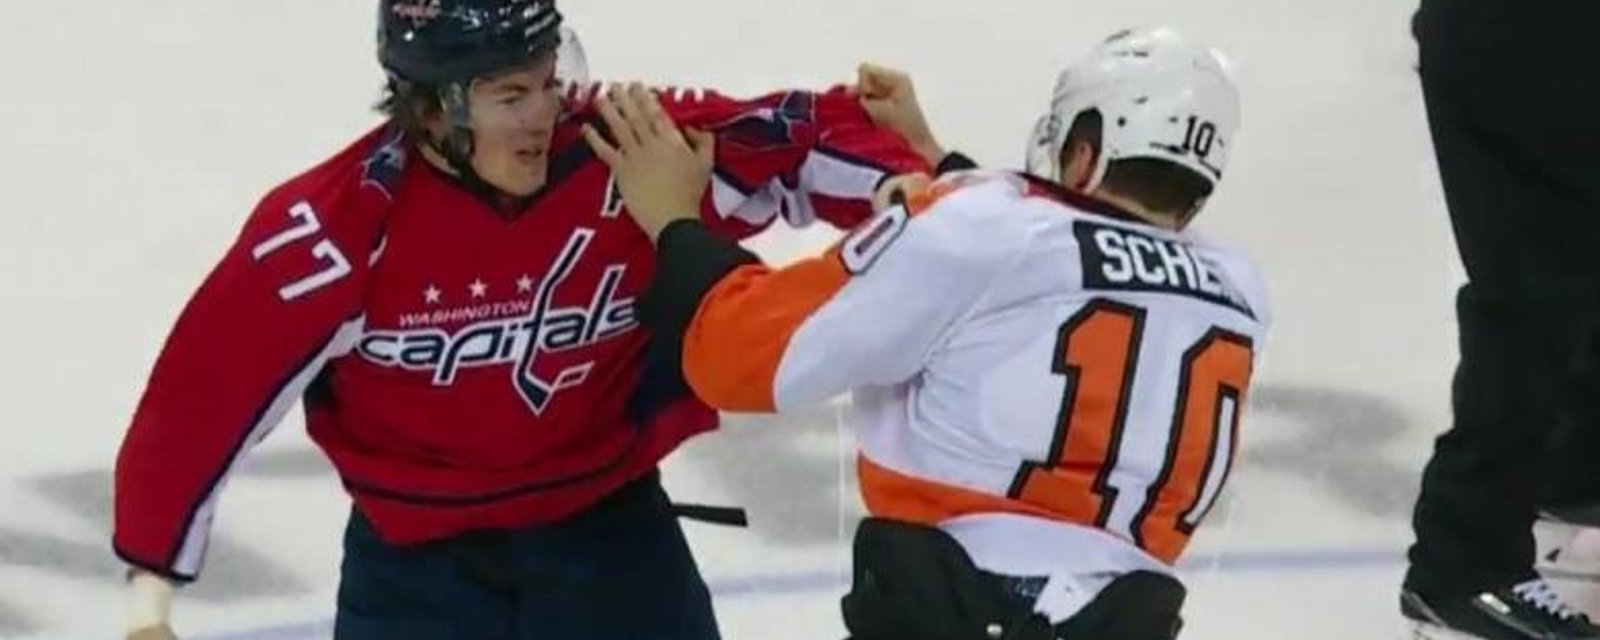 T.J. Oshie and Brayden Schenn kick off the game with a crazy fight!